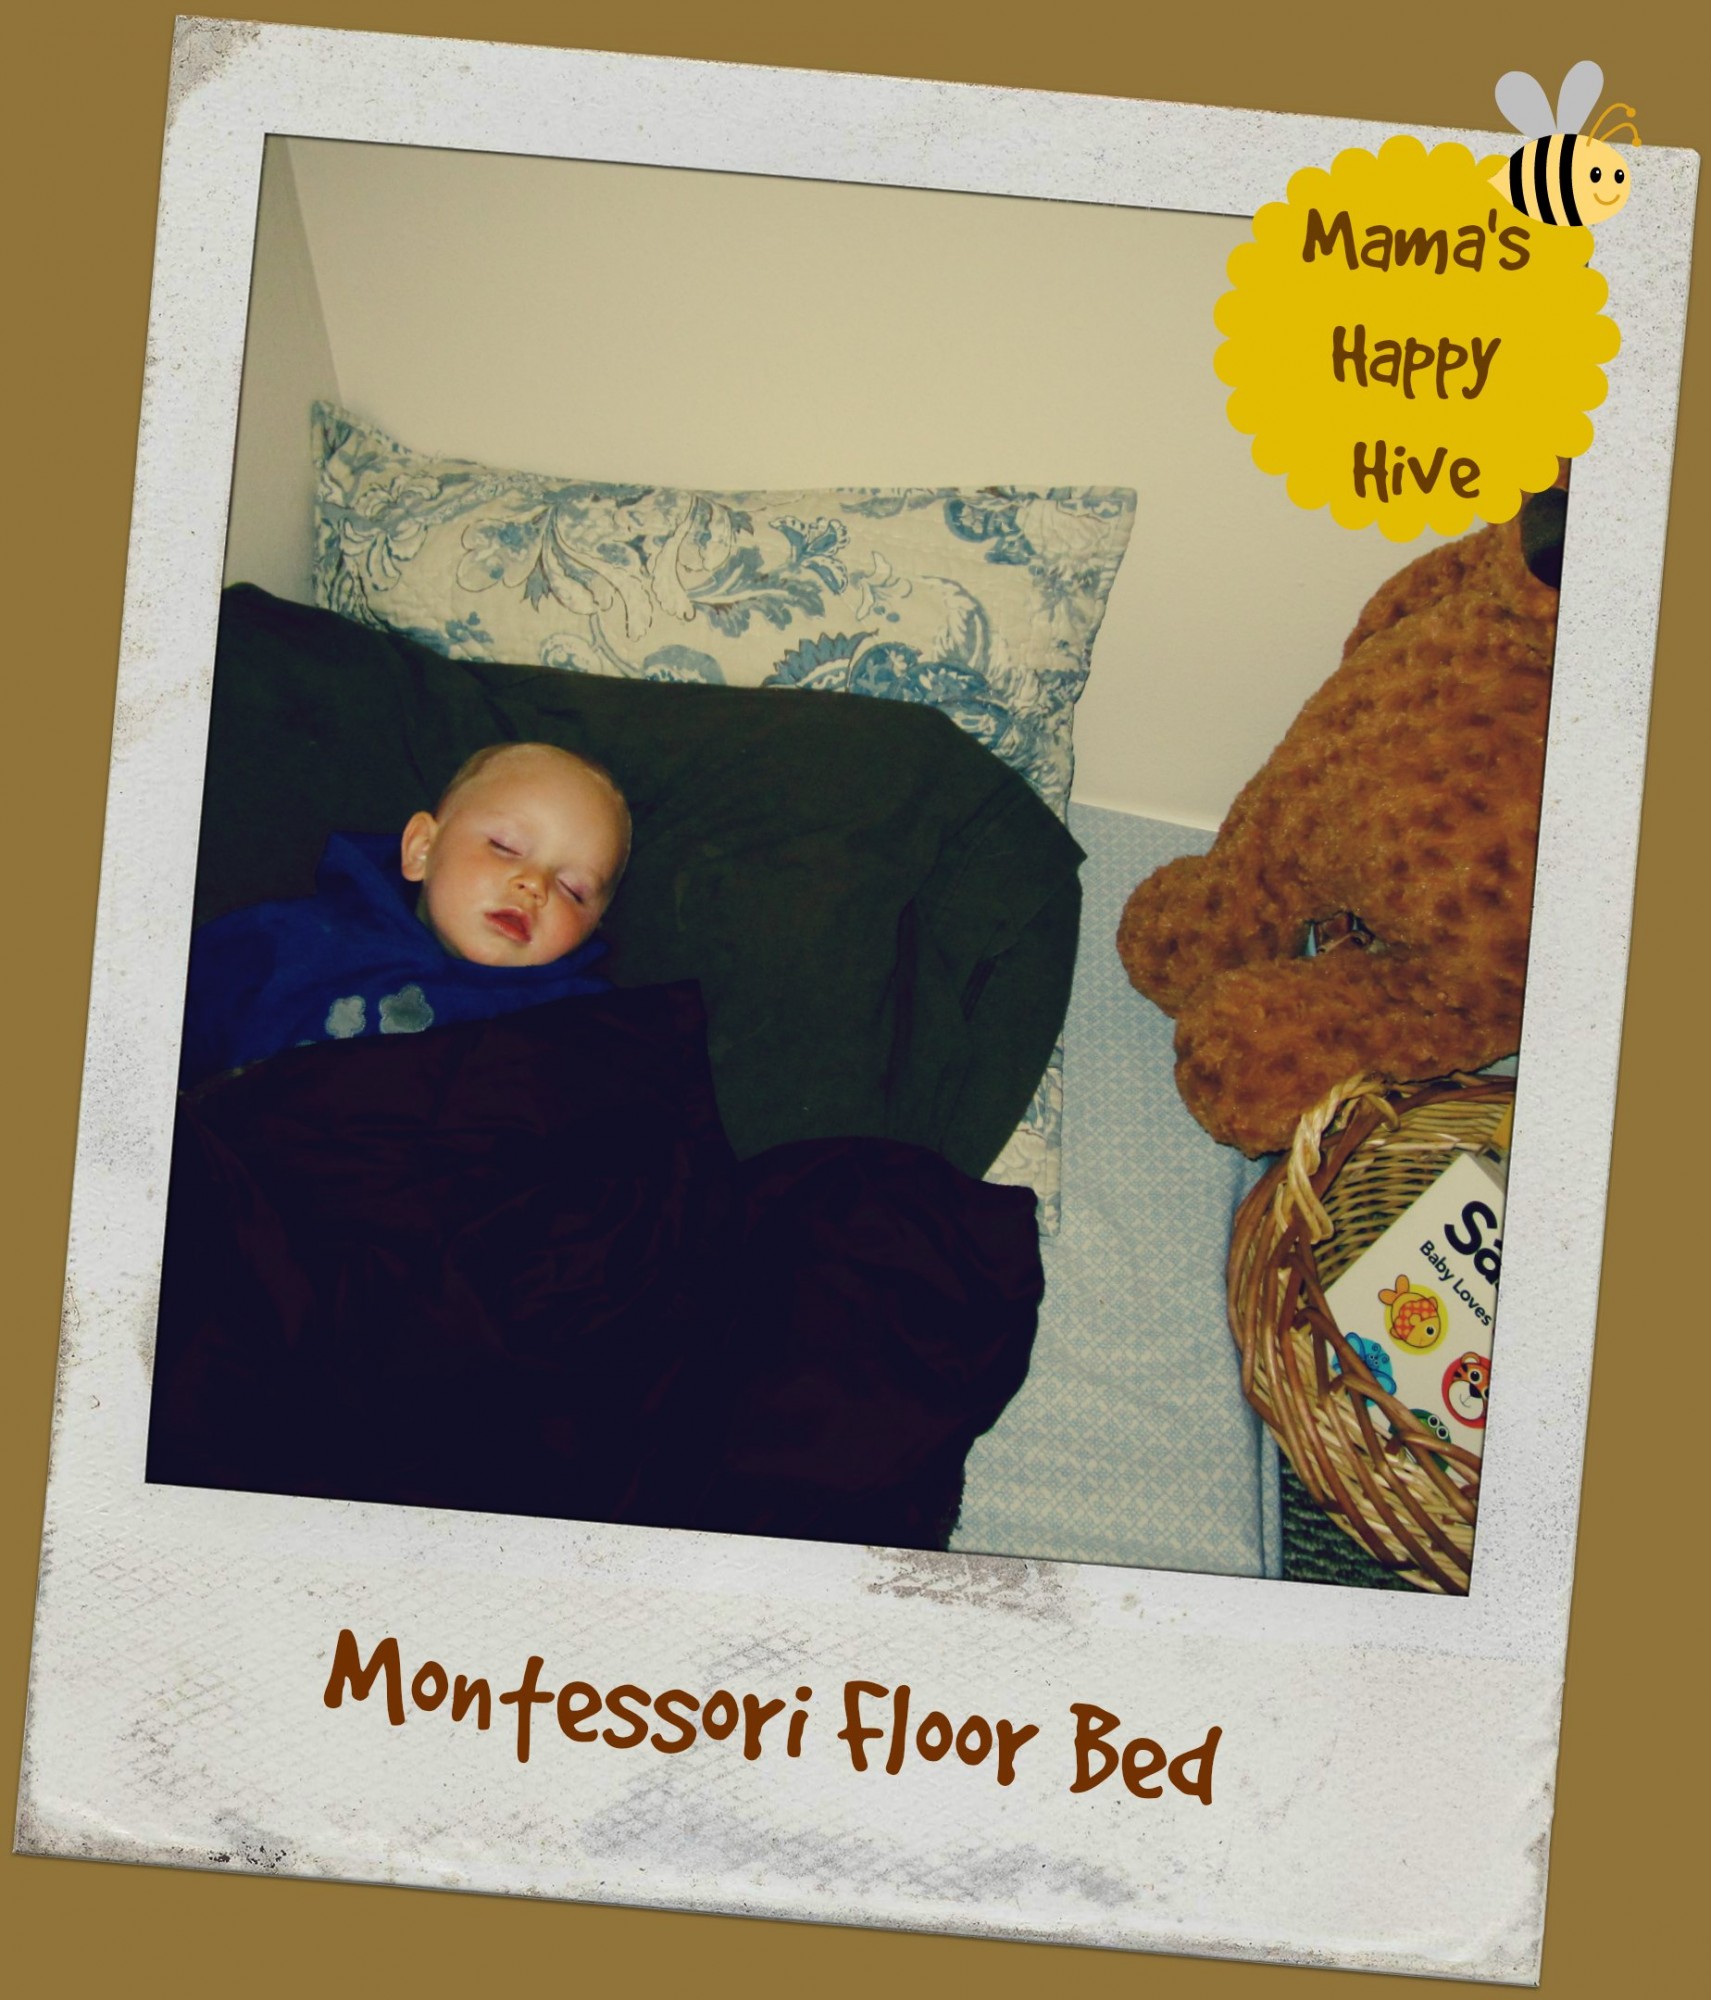 Our daily Montessori routine at 16 months of age. www.mamashappyhive.com